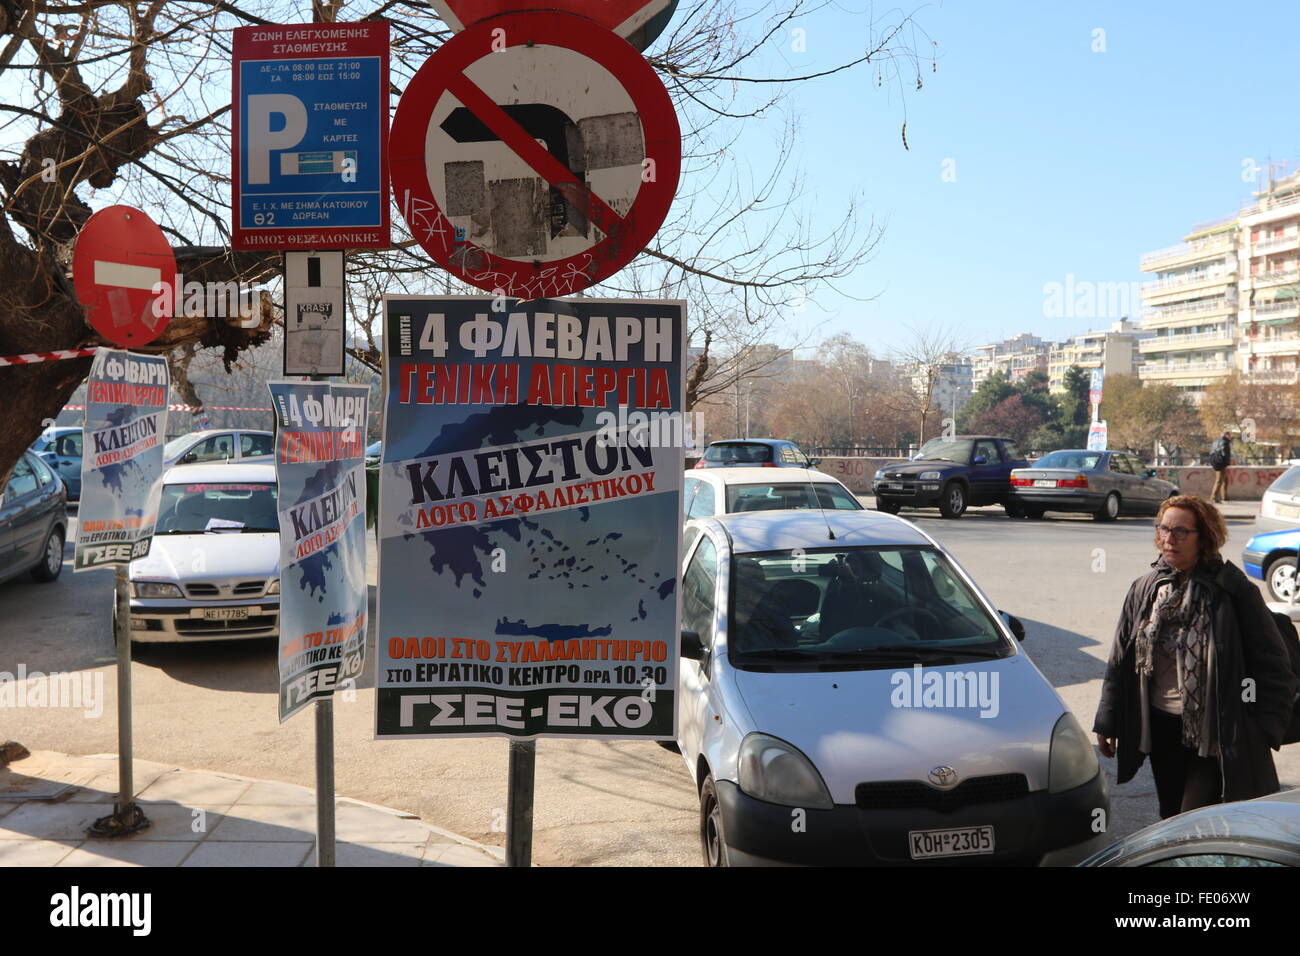 Thessaloniki, Greece, 3 February 2016. A woman walks towards posters announcing a general strike and a rally. Greek public and private sector unions called for a nationwide general on Thursday to protest againts government's planned pension reforms that are part of the country's 3rd international bailout. Public transport is excepted to be severely disrupted, and taxi drivers are expected to join the action. Credit:  Orhan Tsolak/Alamy Live News Stock Photo